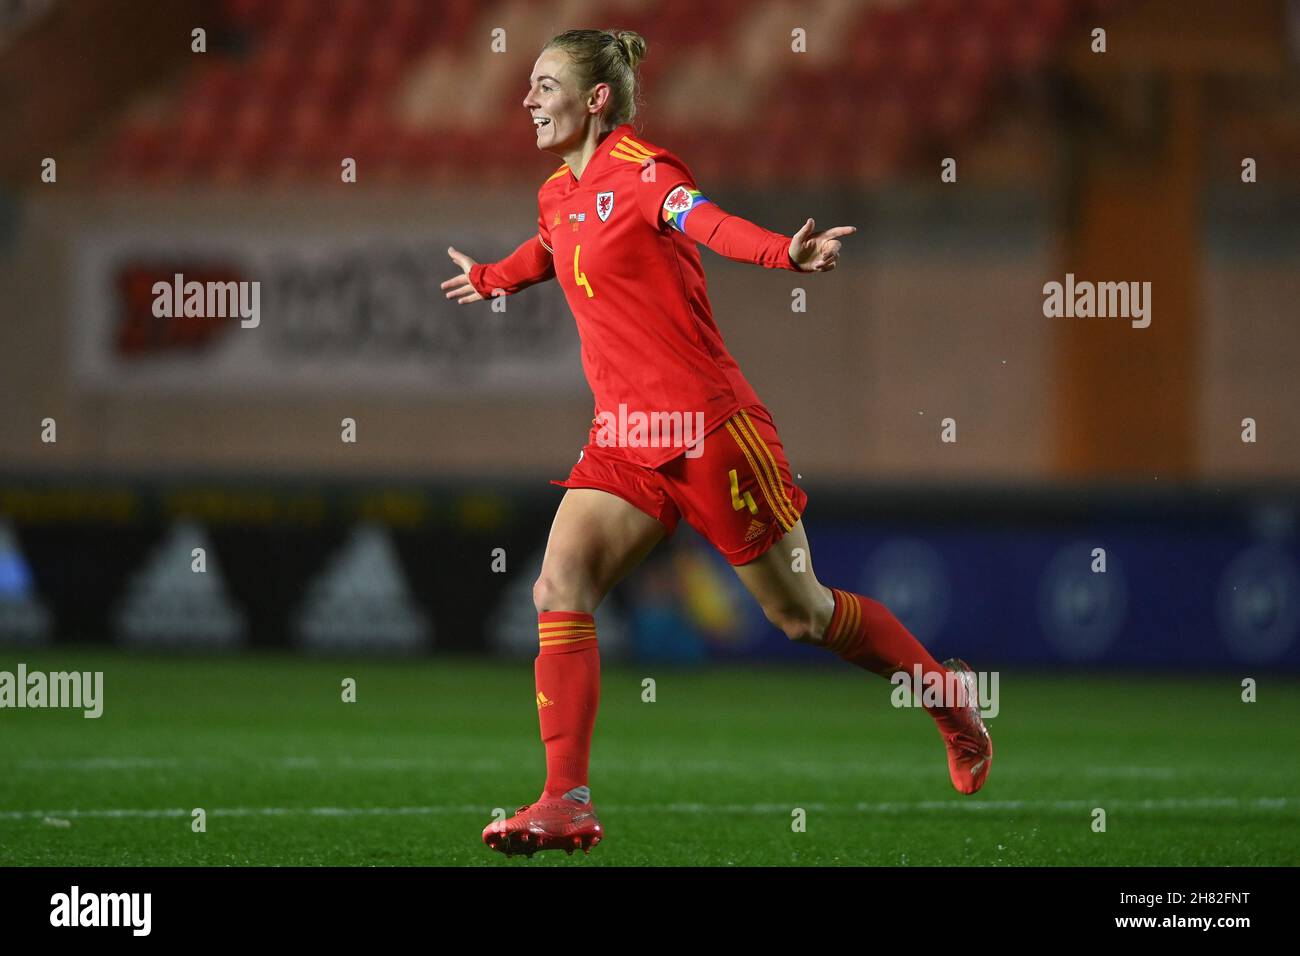 Llanelli, UK. 26th Nov, 2021. Sophie Ingle #4 of Wales Women celebrates scoring the opening goal in Llanelli, United Kingdom on 11/26/2021. (Photo by Ashley Crowden/News Images/Sipa USA) Credit: Sipa USA/Alamy Live News Stock Photo